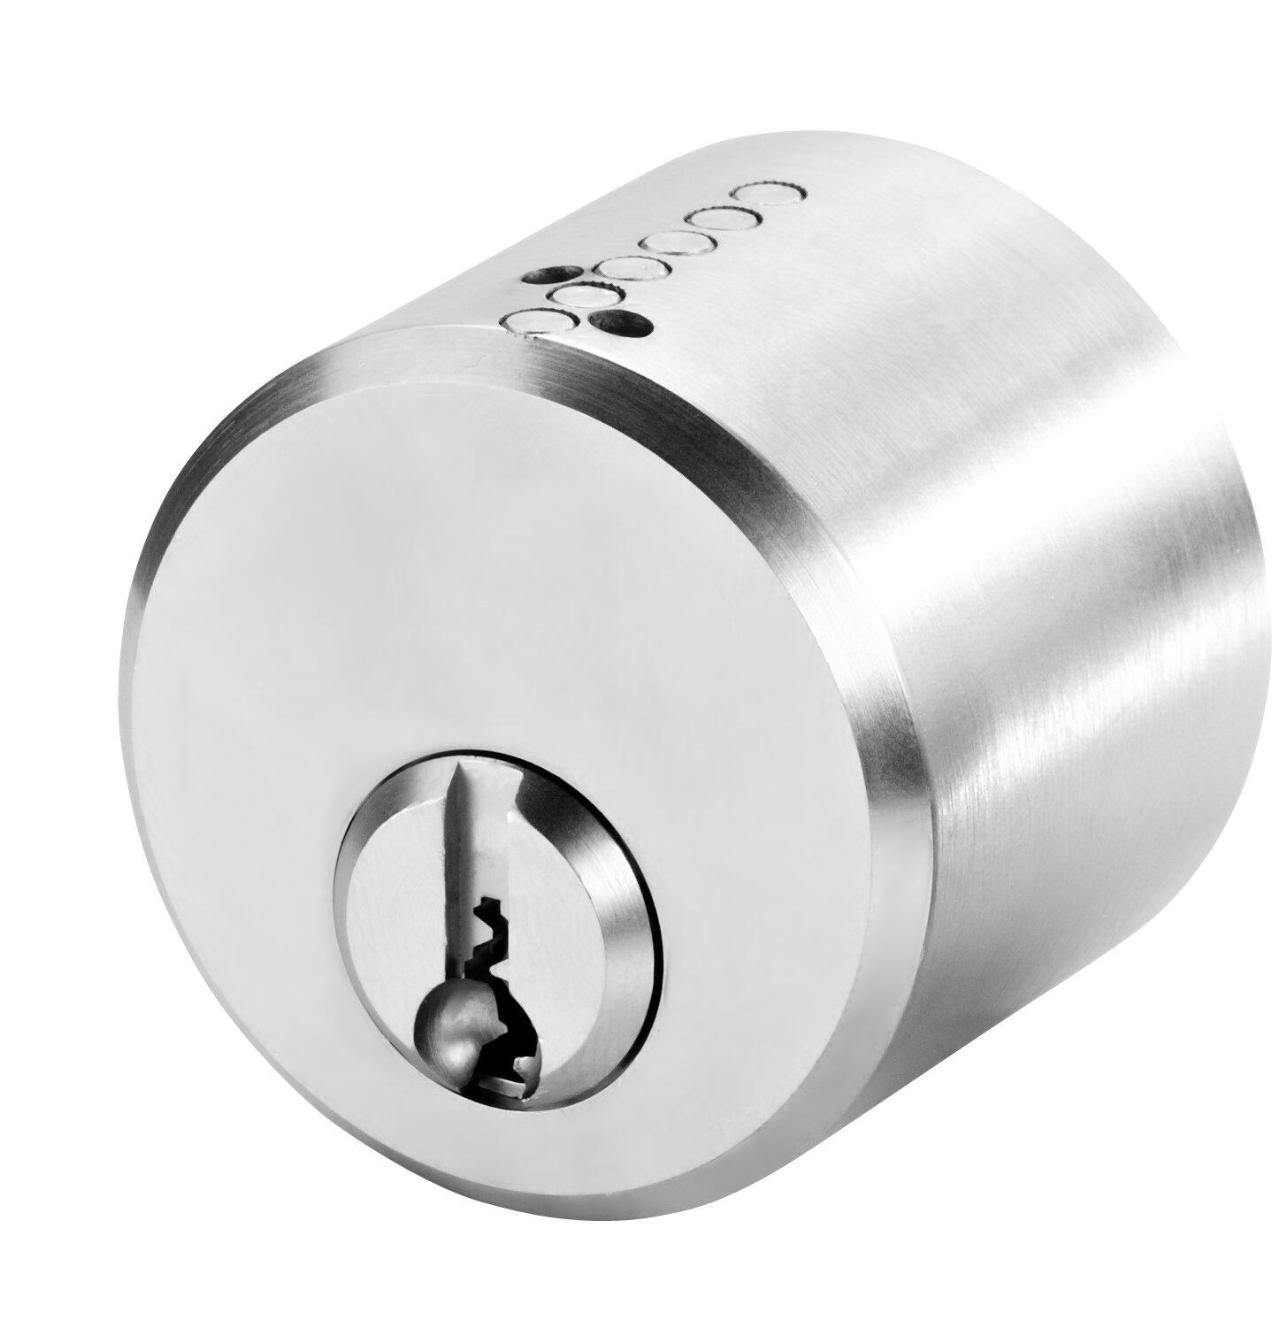 ABUS Zolit Safety cylinder. Exterior